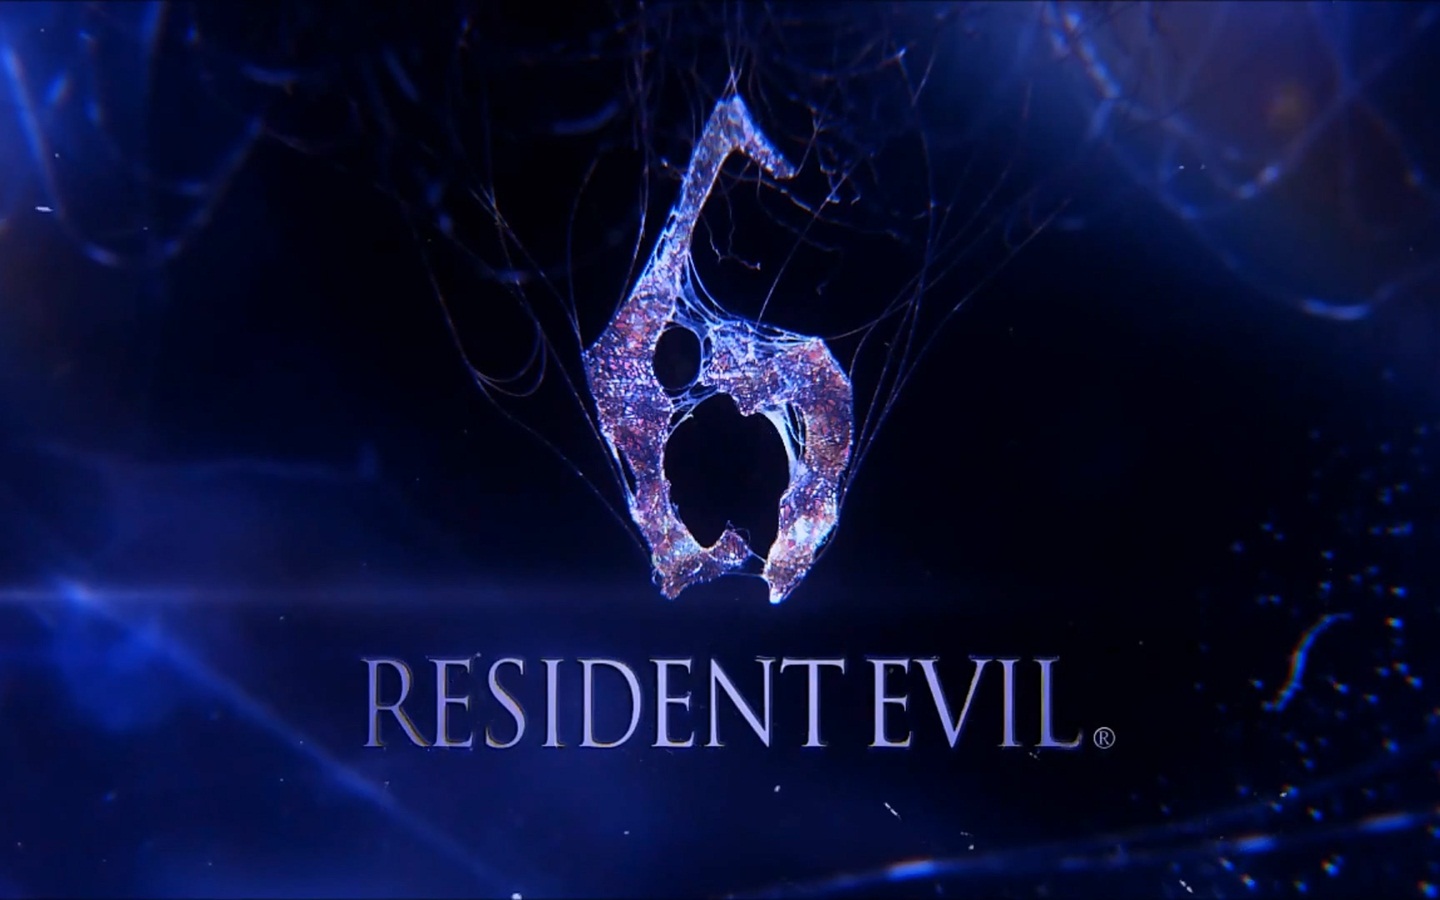 Resident Evil 6 HD game wallpapers #3 - 1440x900